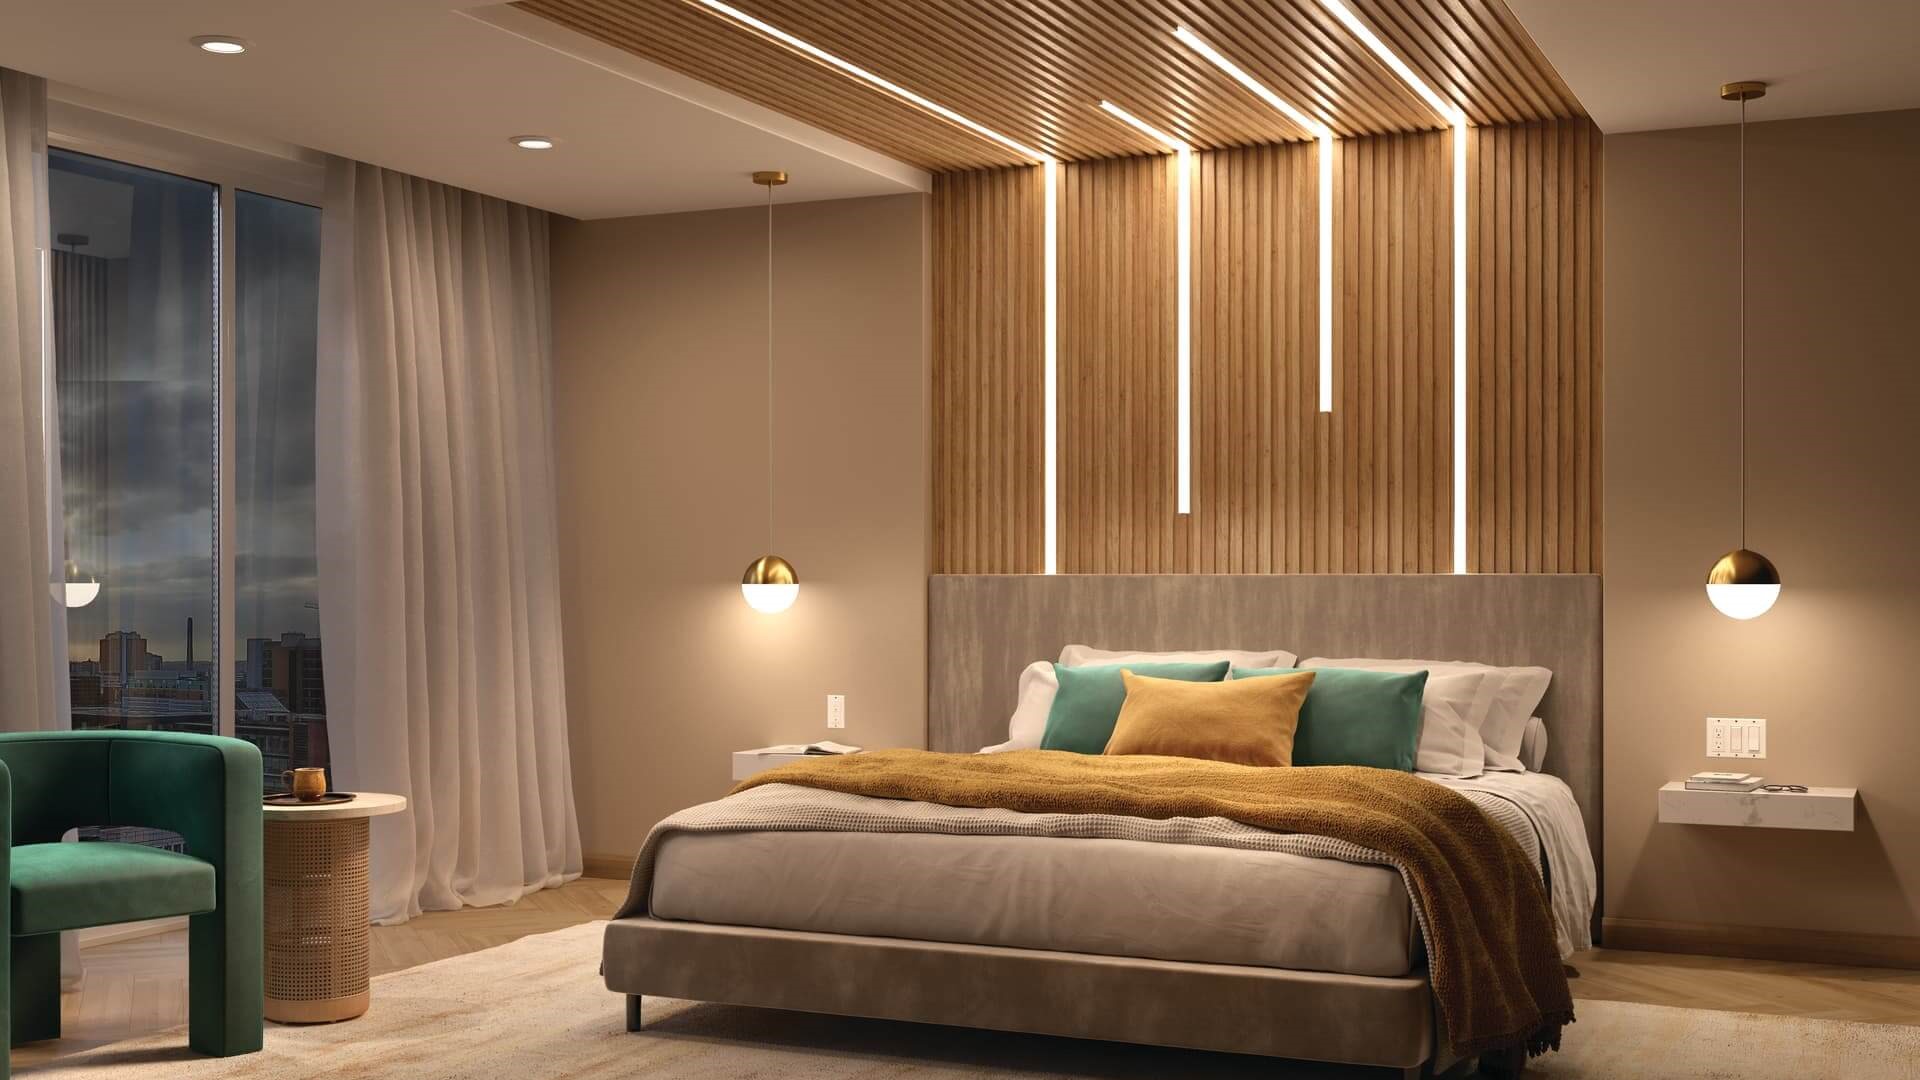 modern channel lighting on a bedroom wall and ceiling